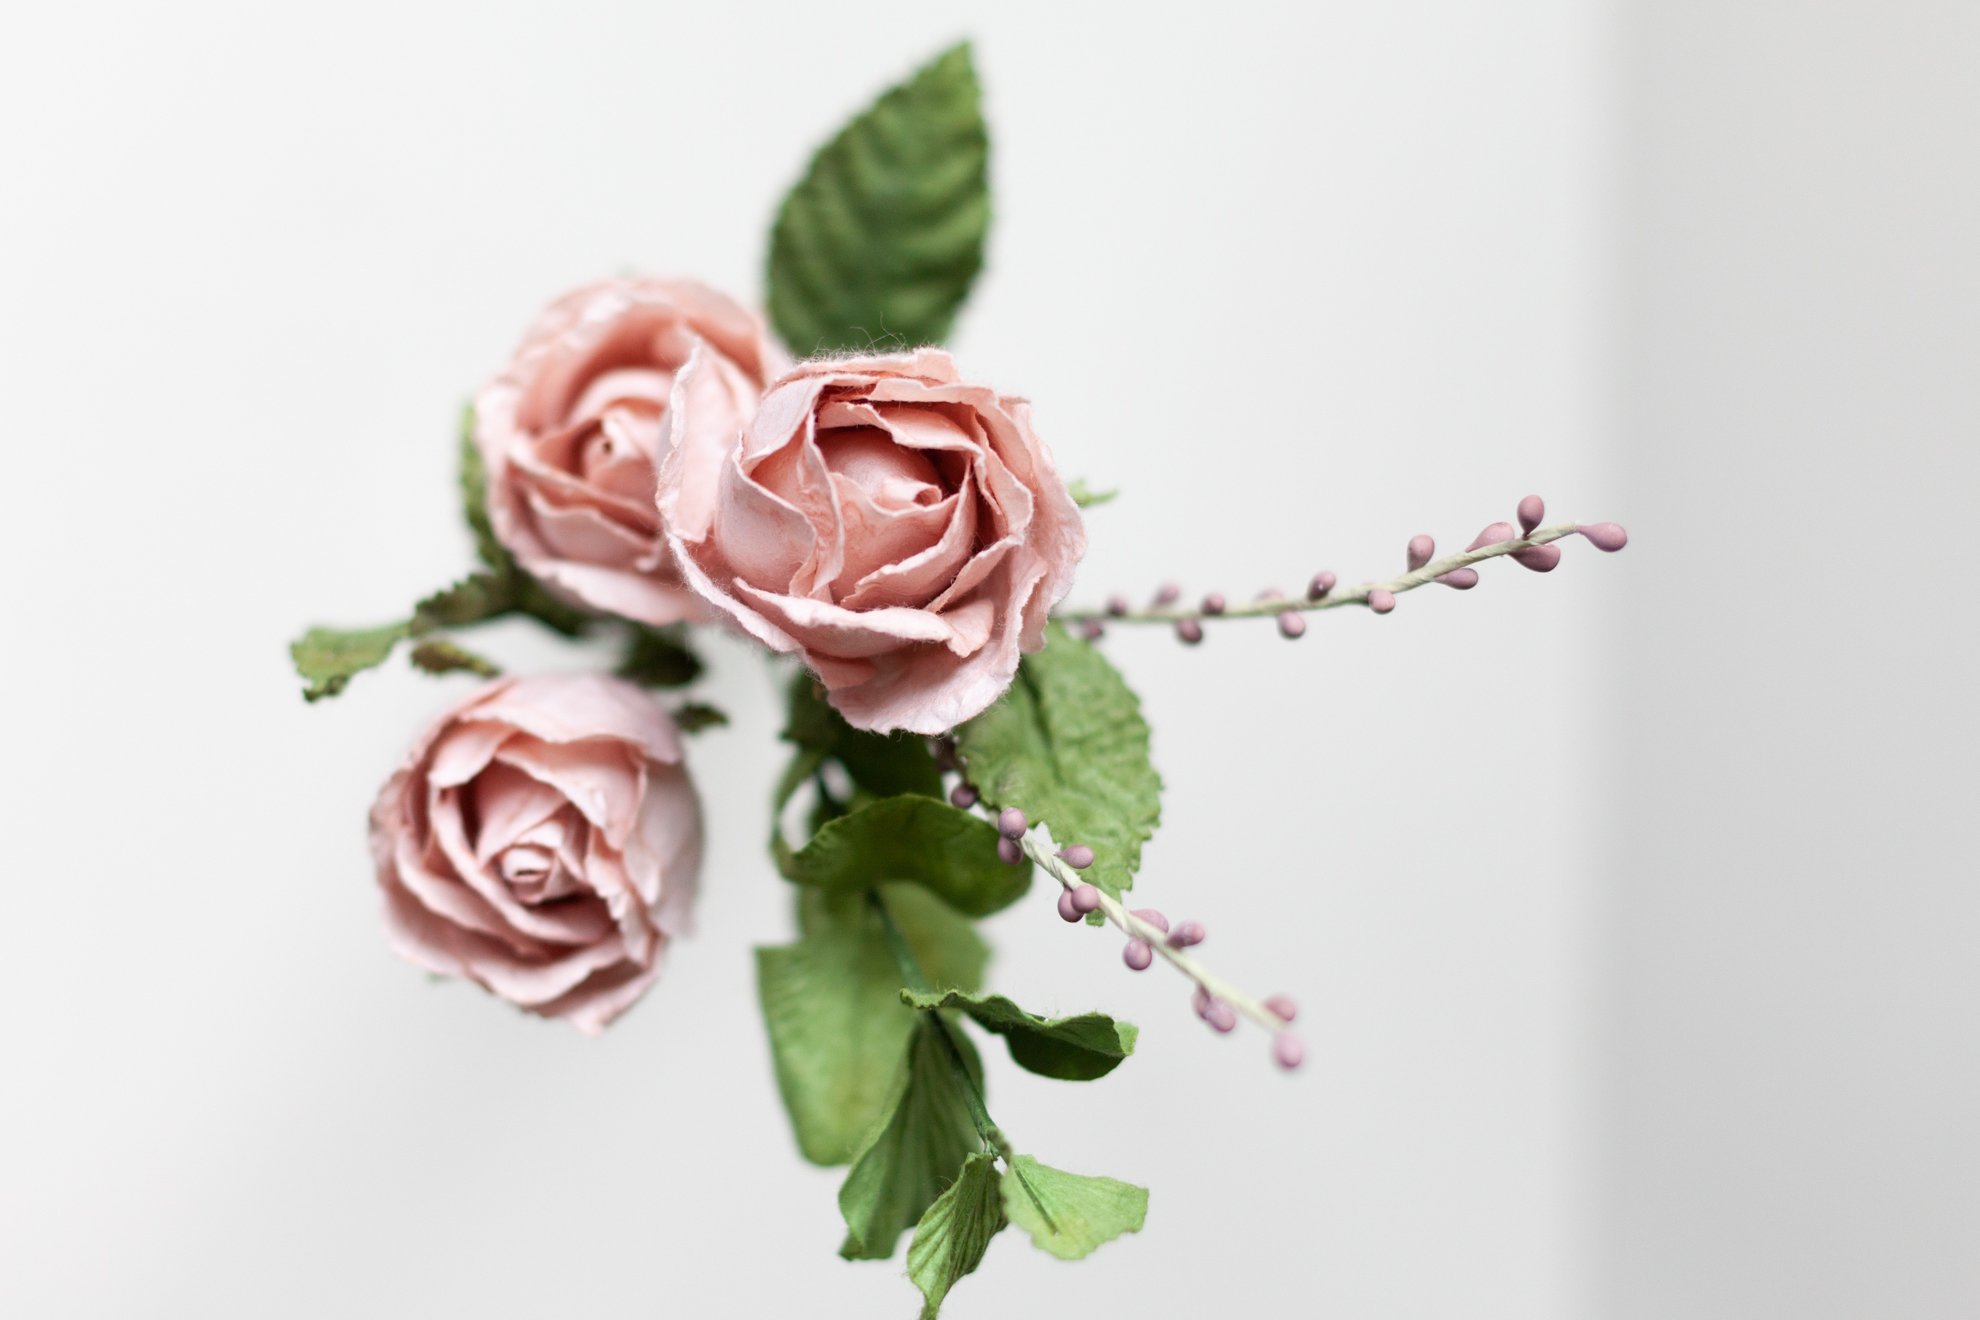 Peach paper roses bouquet, origami flowers – And so to Shop